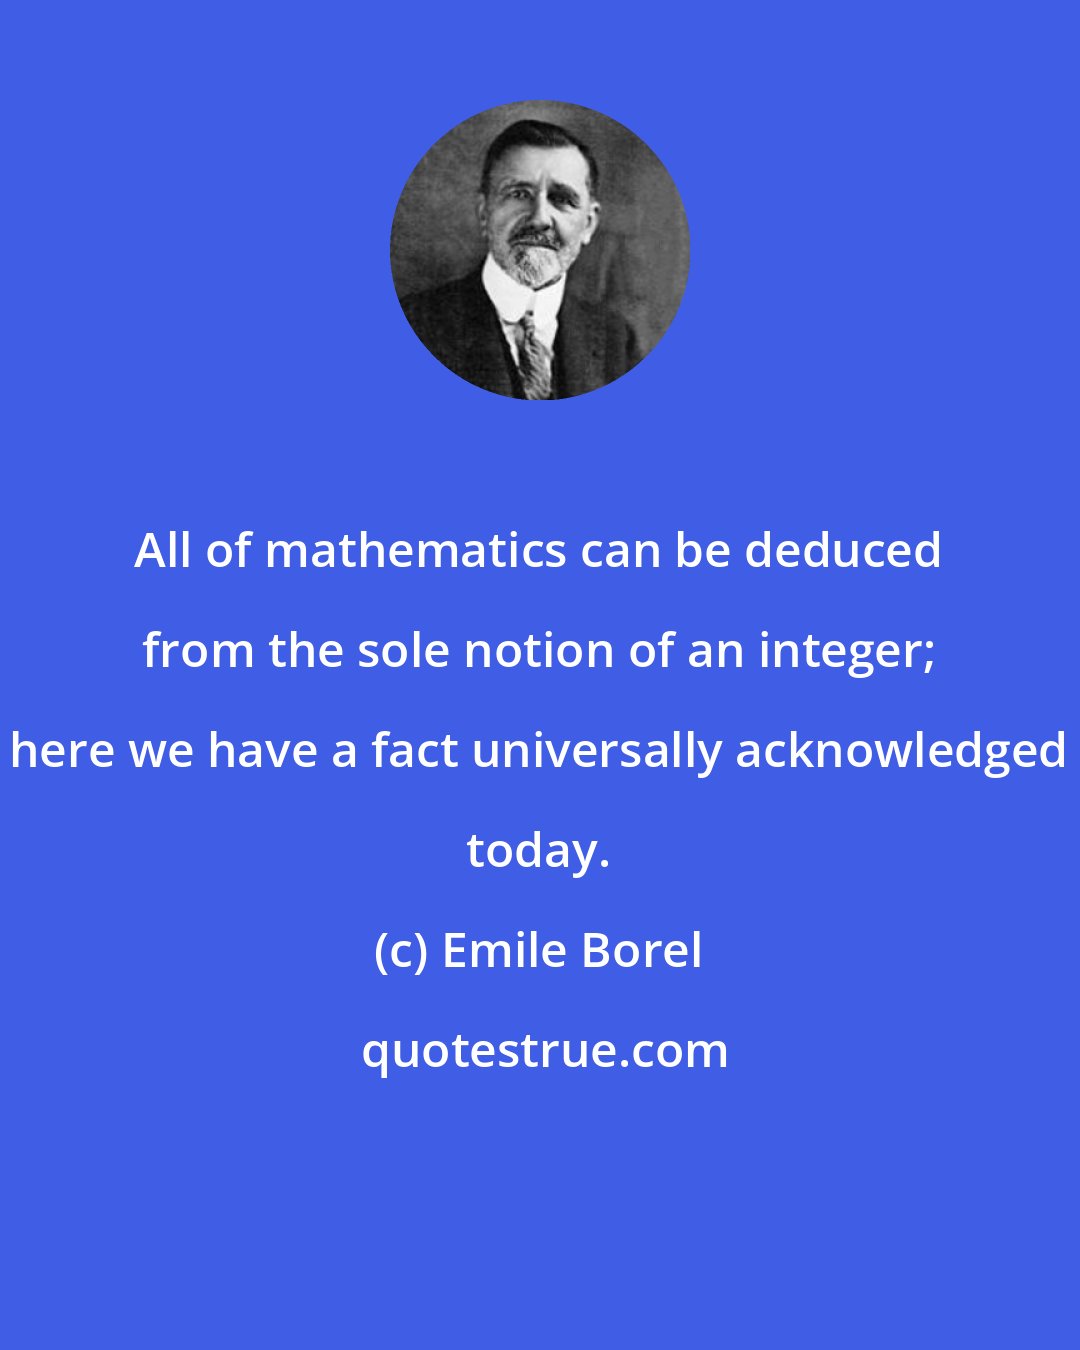 Emile Borel: All of mathematics can be deduced from the sole notion of an integer; here we have a fact universally acknowledged today.